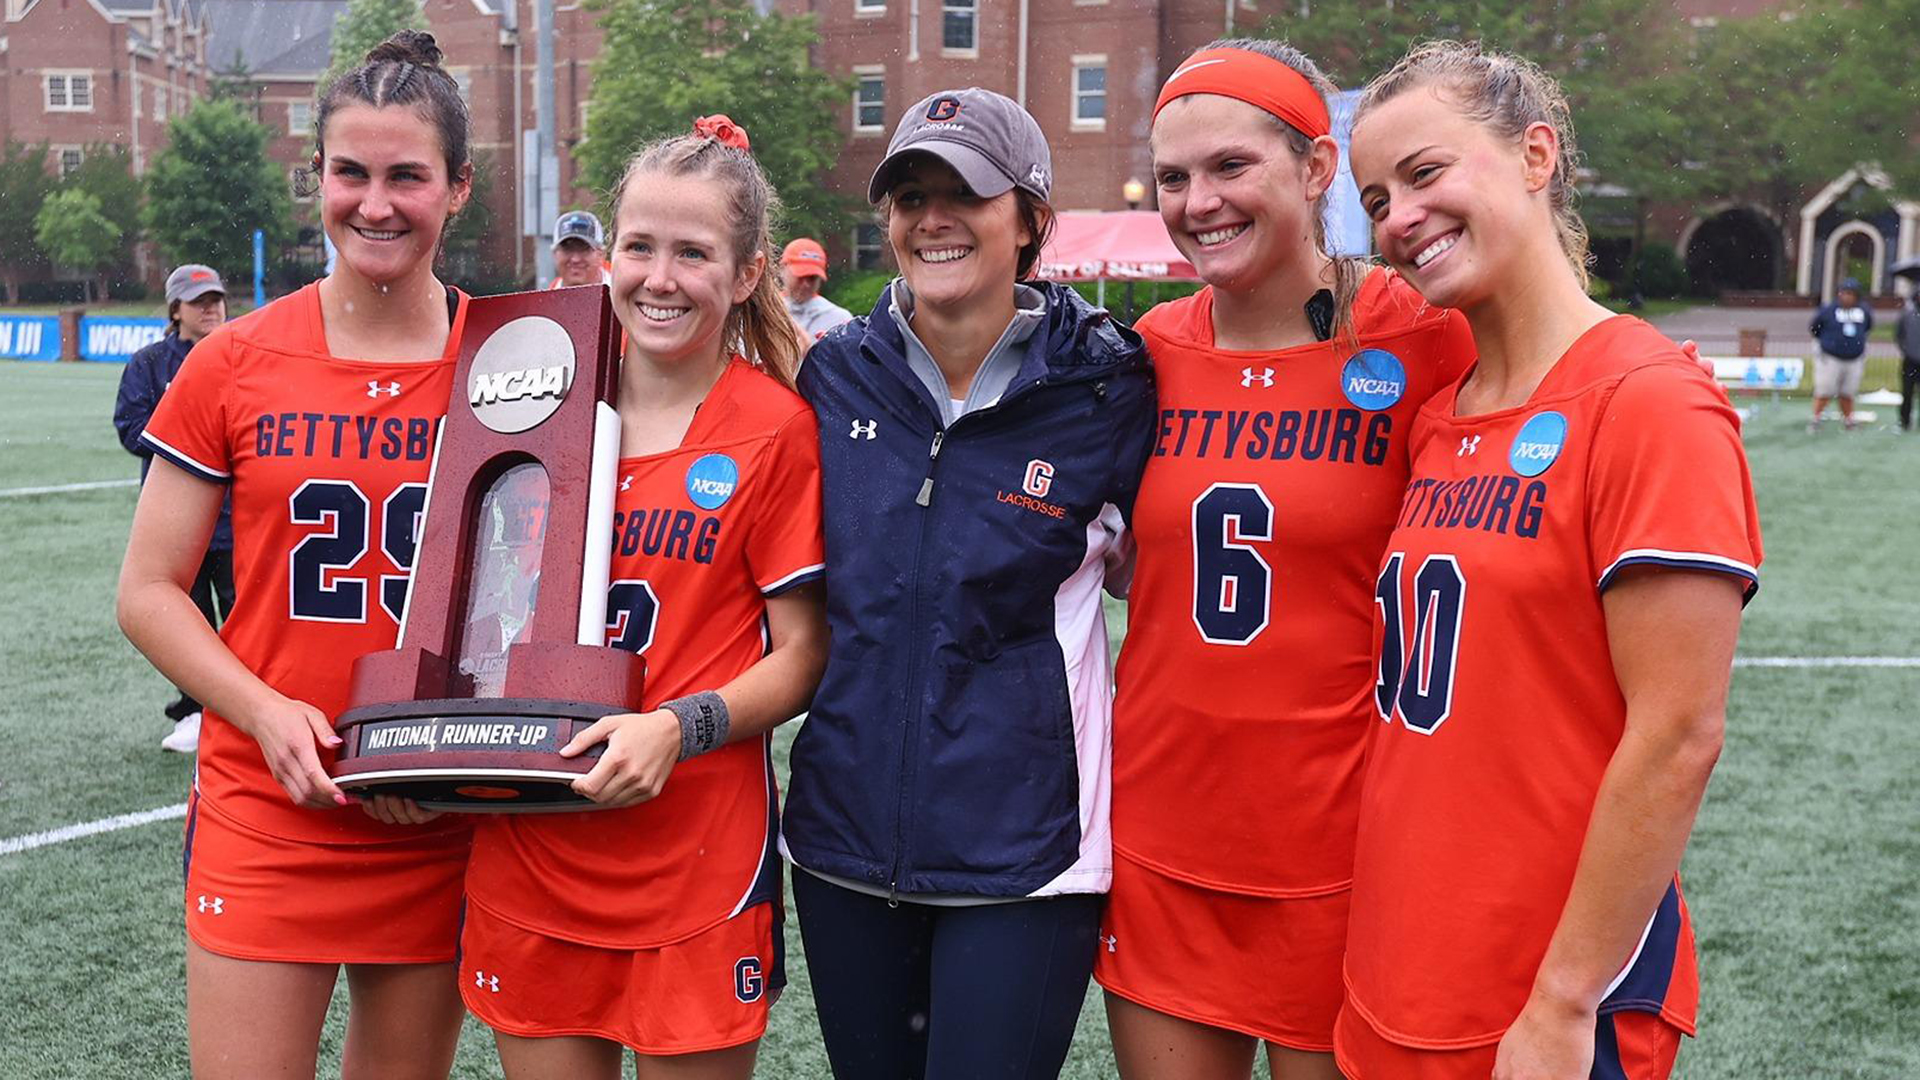 Middlebury Tops Gettysburg for Back-to-Back Titles